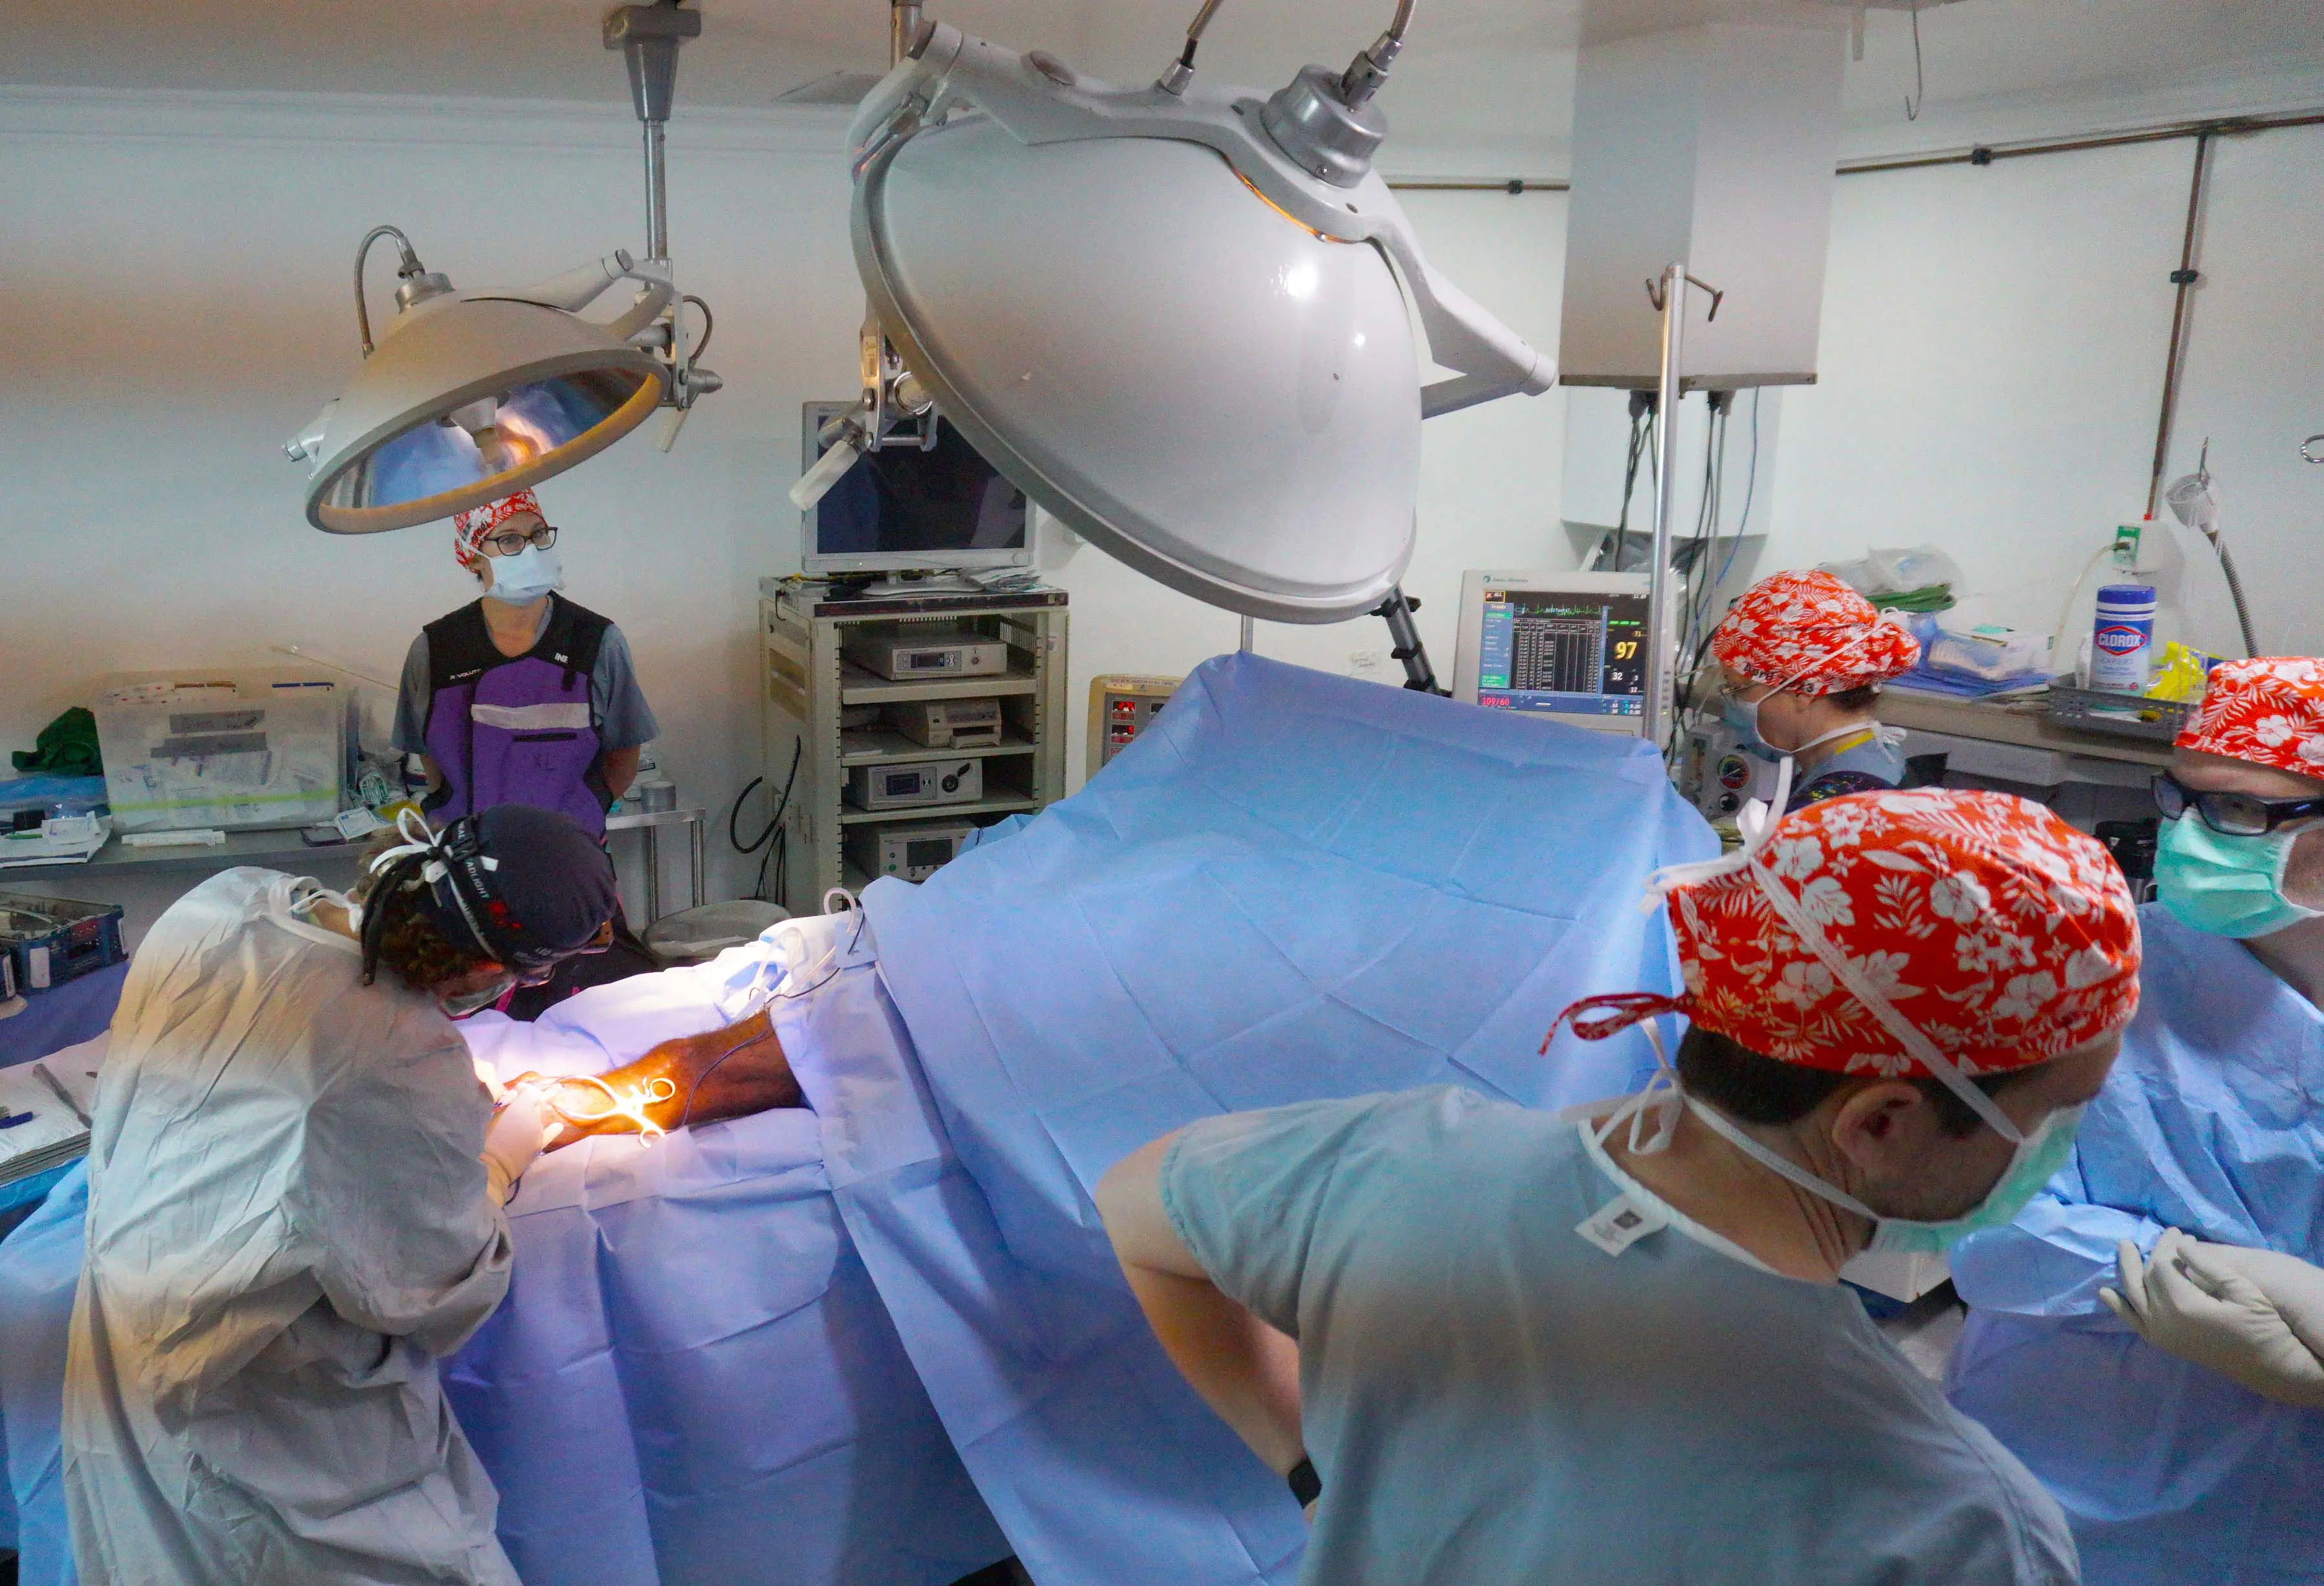 GLORI medical team performs surgery with support from hospital staff and residents at El Buen Samaritano Hospital in La Romana, Dominican Republic. 




